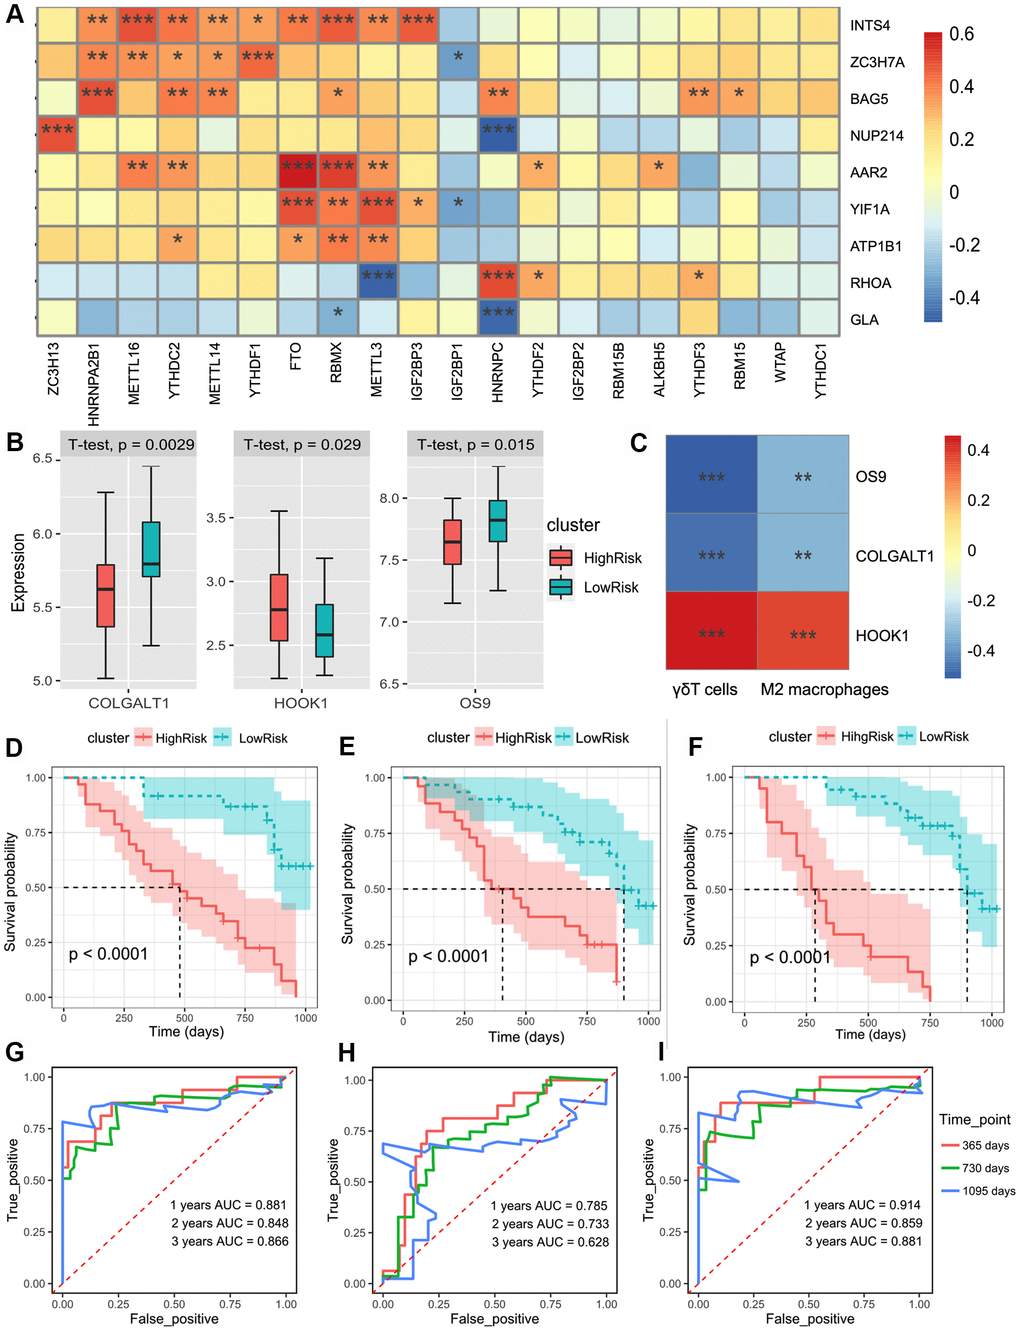 (A) The heatmap of the correlations between the m6A-related genes and 9 m6A-related-CoV genes in the whole blood of IPF. (B) Patients were divided into the low-risk group and high-risk group according to the infiltration of γδT cells and M2 macrophages. The box plot showed the difference of the COLGALT1, HOOK1, and OS9 between low-risk and high-risk groups. (C) The heatmap of the correlations between the 2 immune cell composition and 3 SARS-CoV-2 related DEGs. (D) Kaplan–Meier plot of overall survival in two clusters based on the risk models of m6A-related-CoV genes (Score 1). (E) Kaplan–Meier plot of overall survival in two clusters based on the risk models of the immune infiltration patterns (Score 2). (F) Kaplan–Meier plot of the overall survival in two clusters based on the risk models of the combined Cox regression model. (G) The ROC curve in the risk models of m6A-related-CoV genes (Score 1). (H) The ROC curve in the risk models of the immune infiltration patterns (Score 2). (I) The ROC curve in the risk models of the combined Cox regression model.